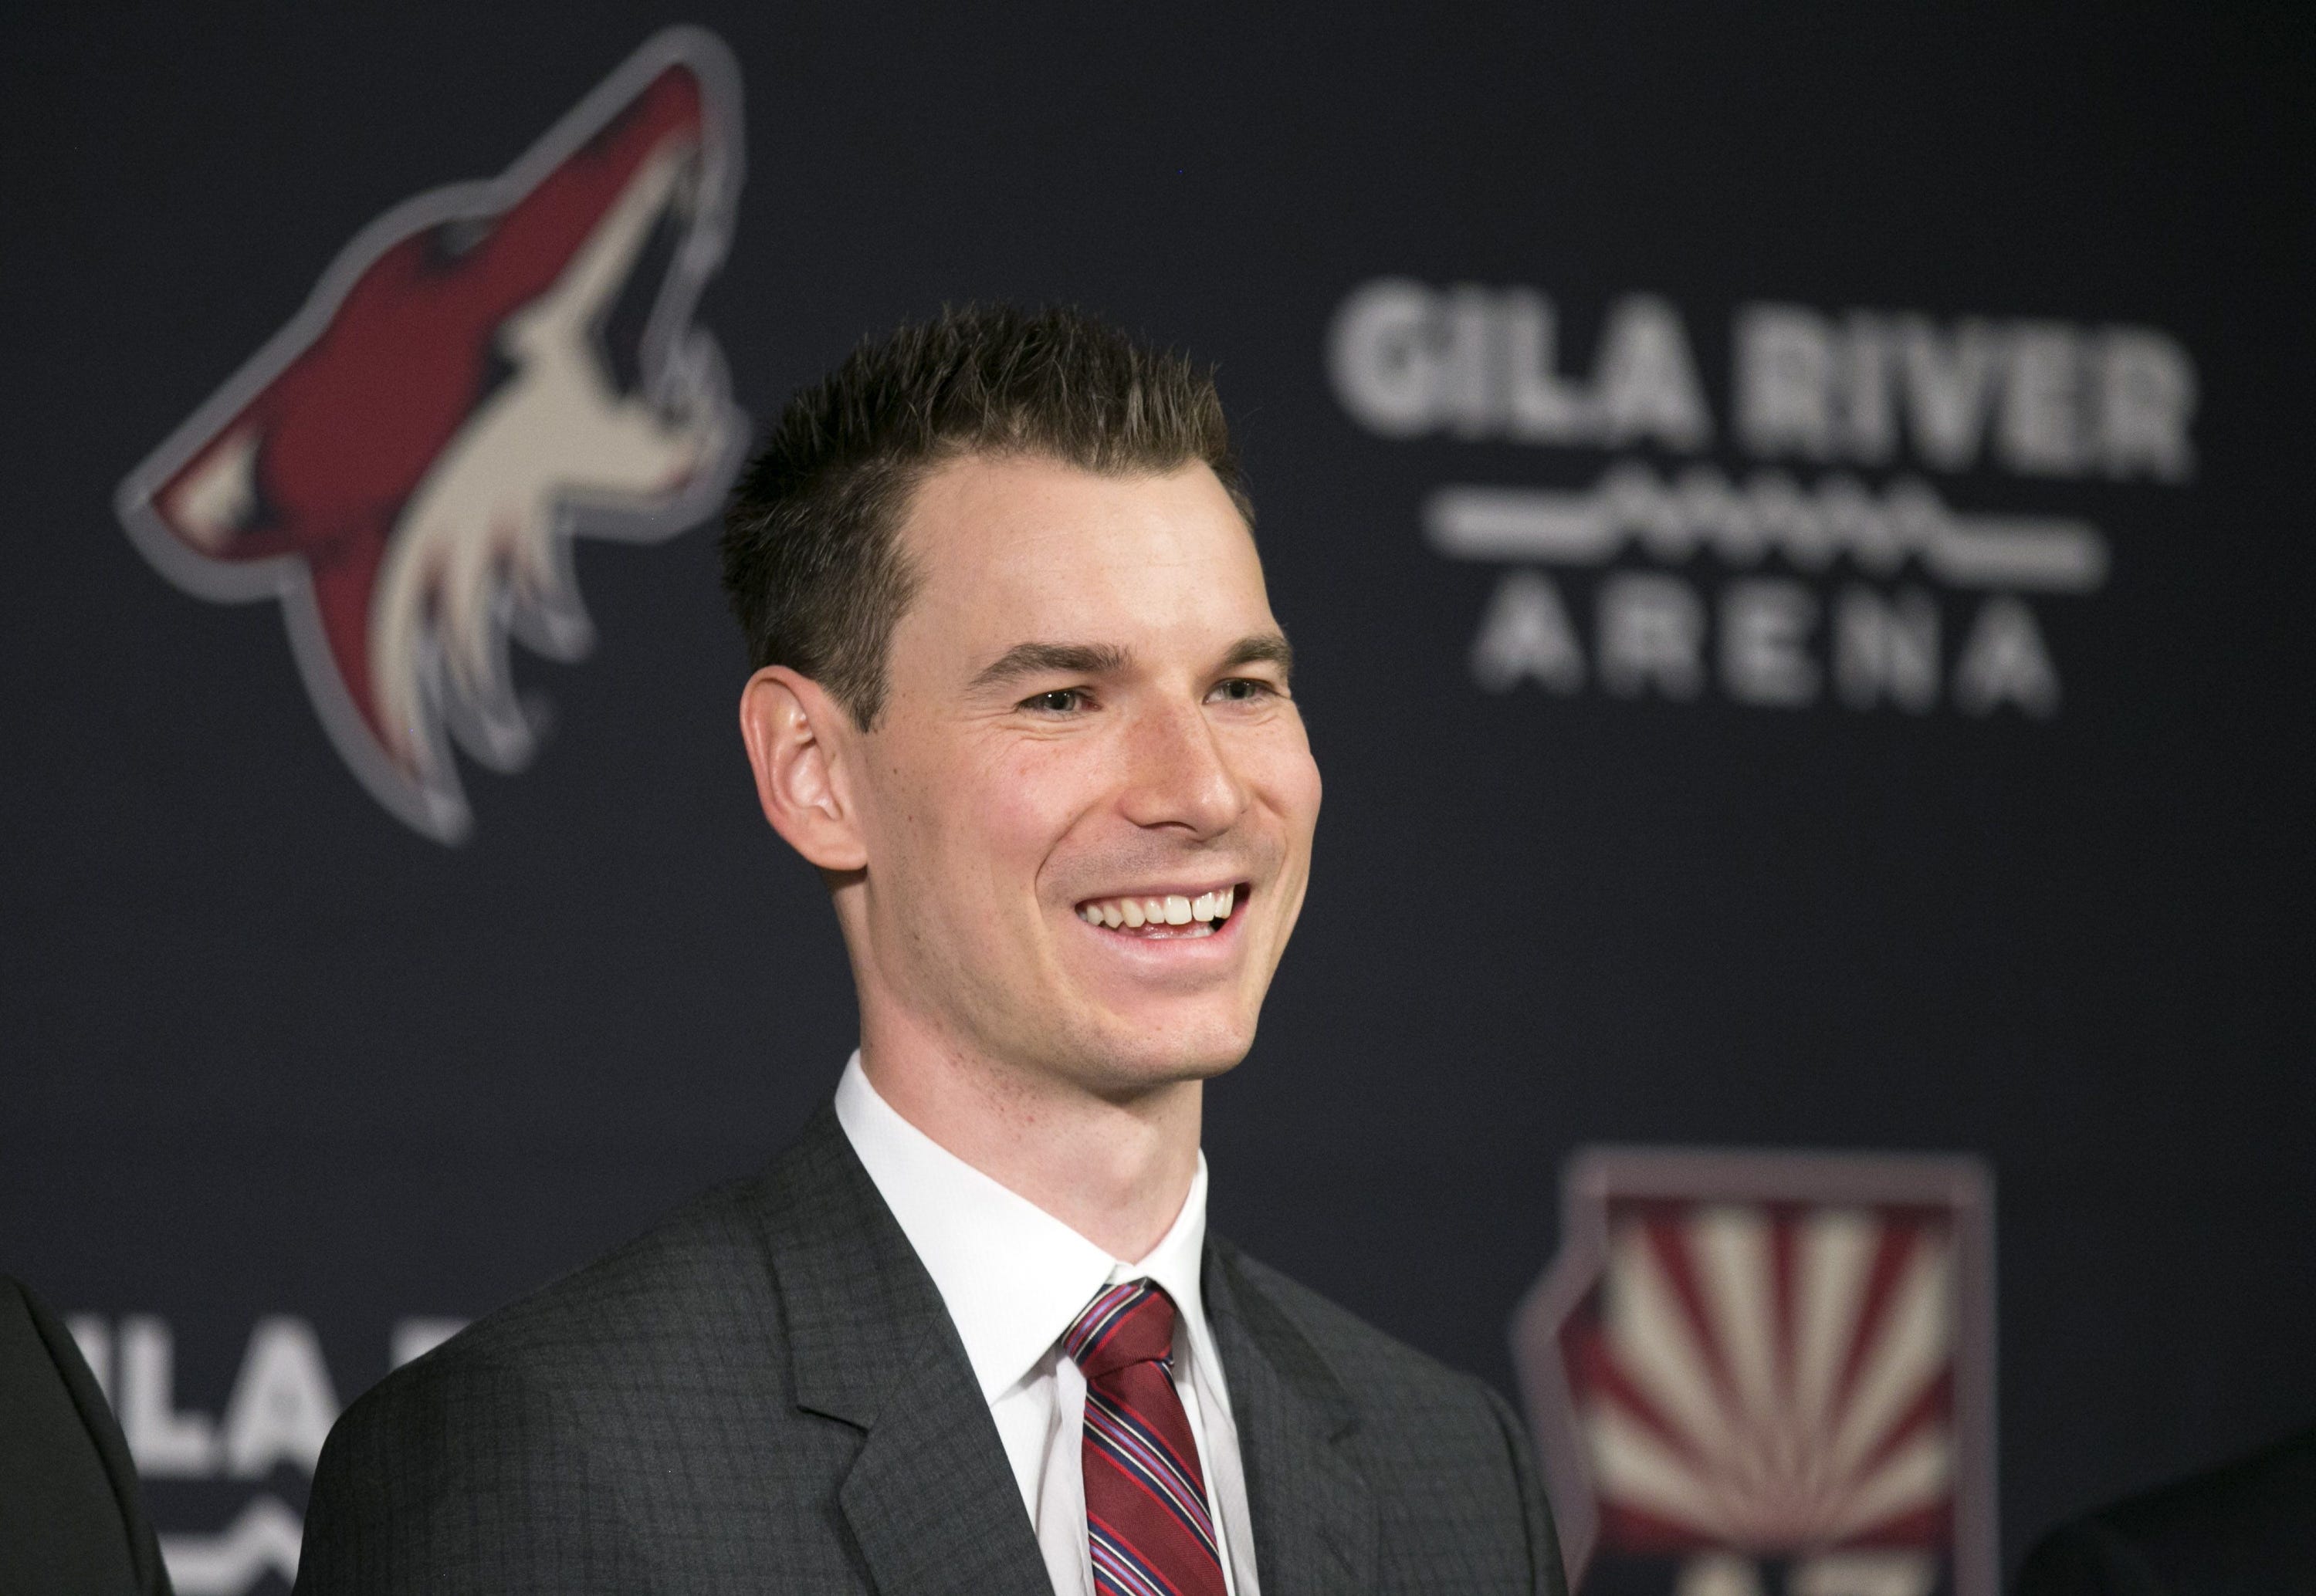 29-year-old Coyotes GM John Chayka's bold moves starting to pay off